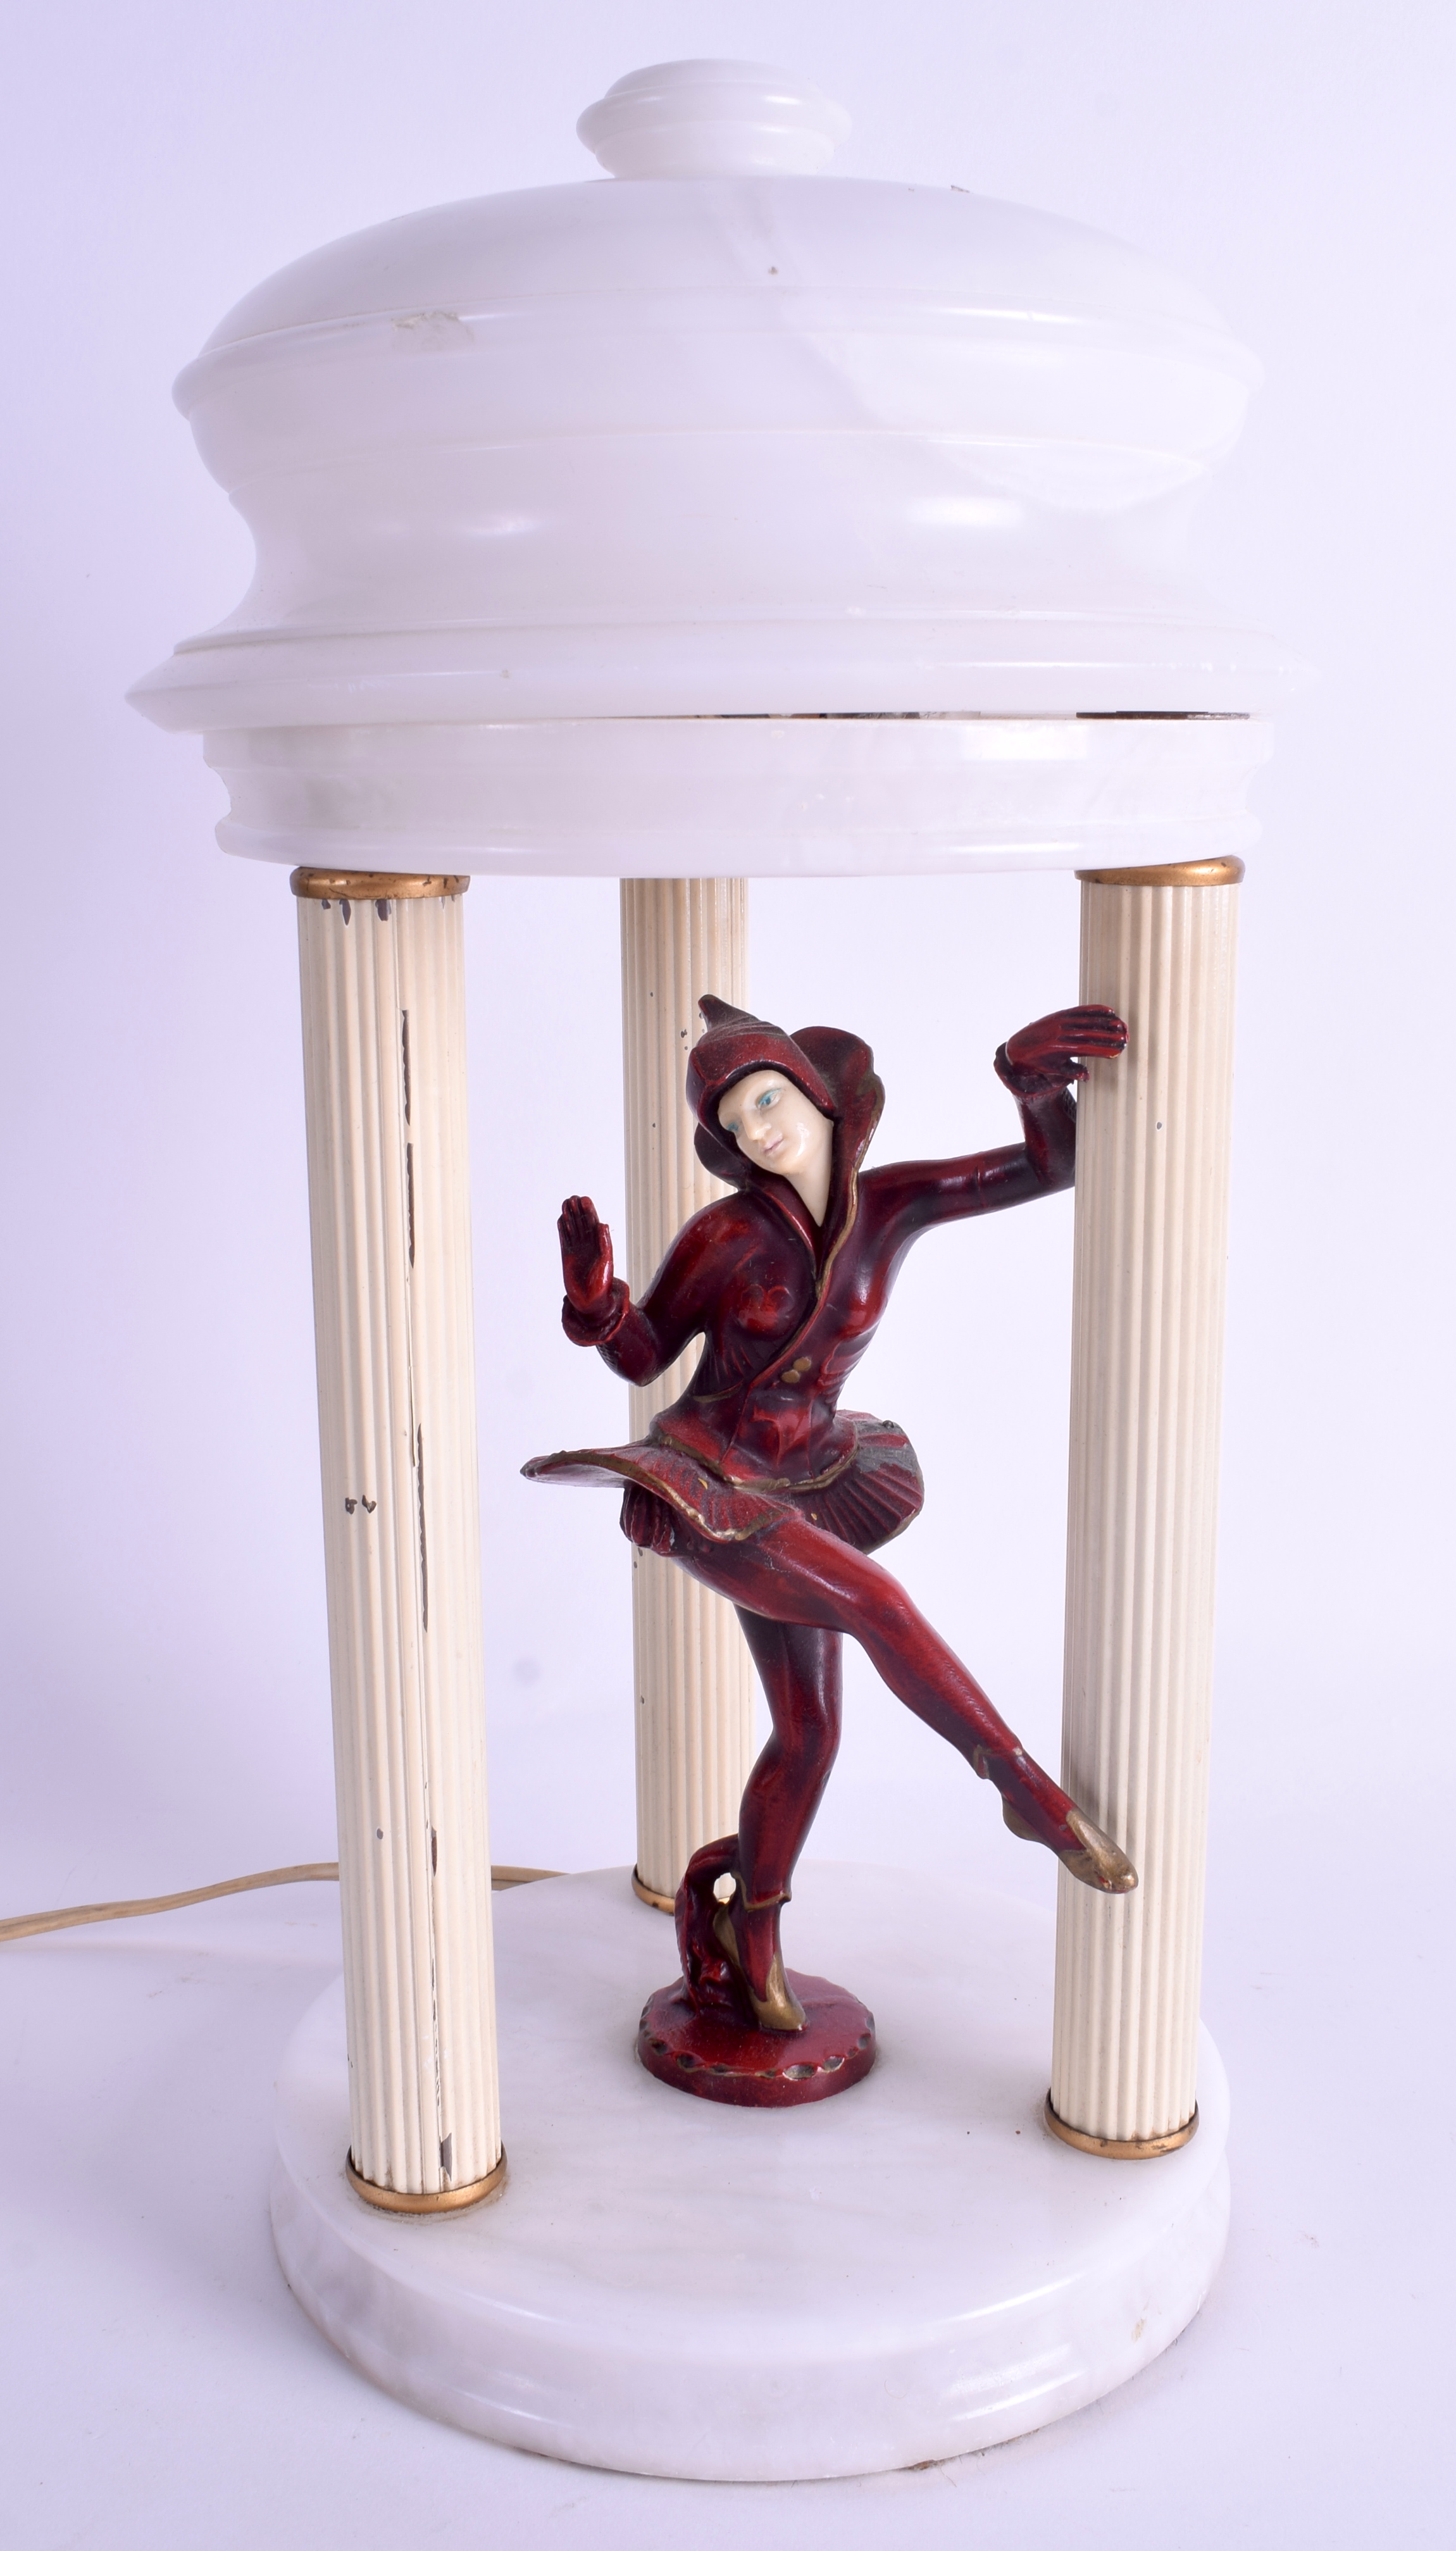 AN UNUSUAL ART DECO PAINTED SPELTER FIGURE in the form of a lamp. 38 cm high.